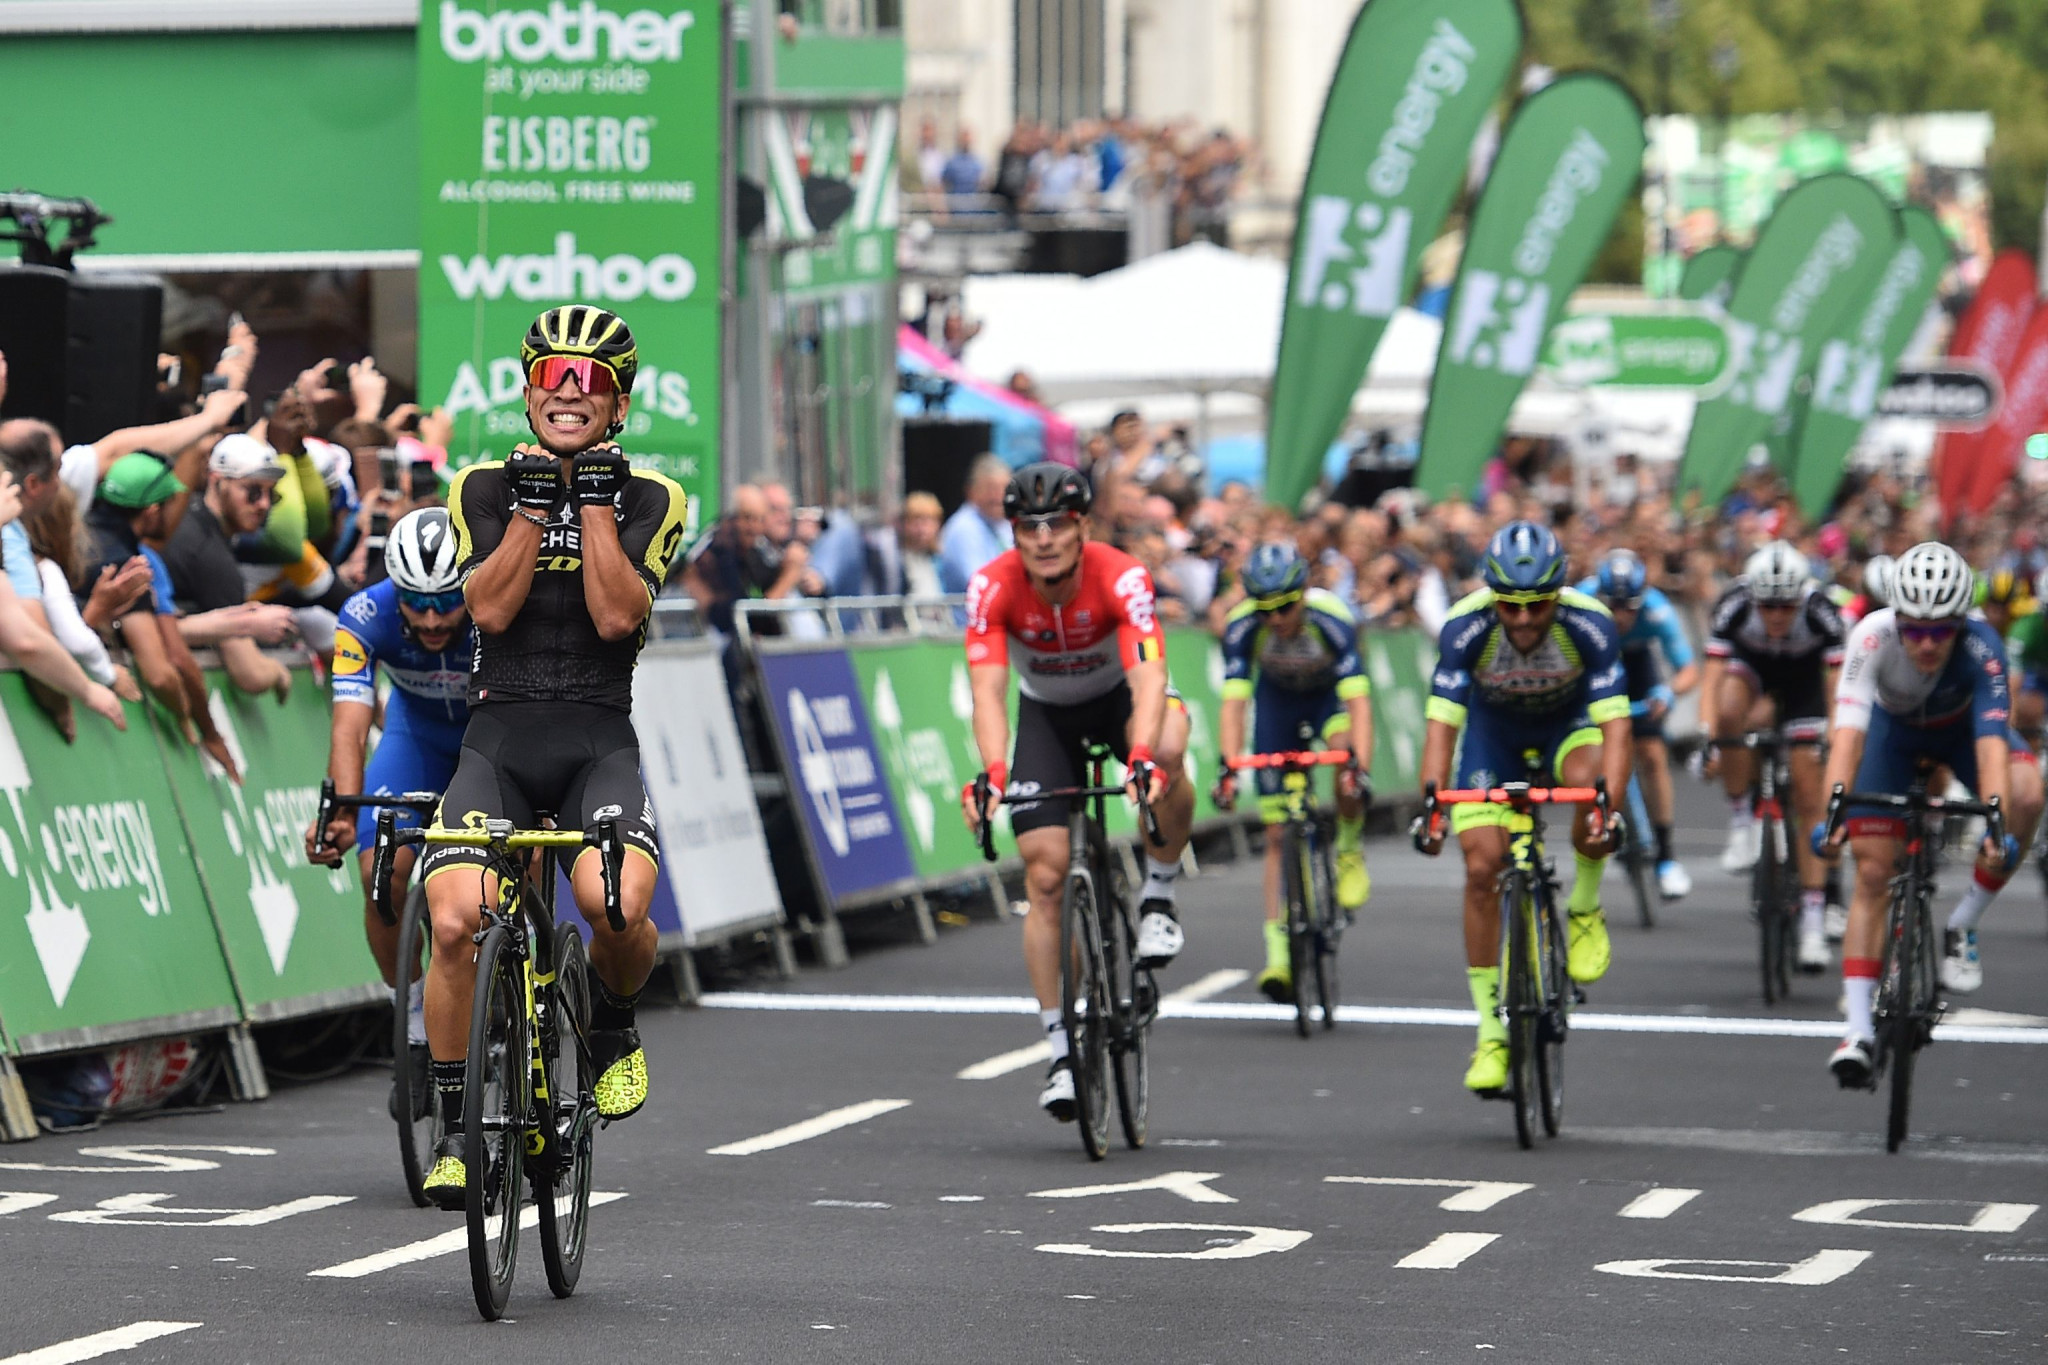 OnePlan have been appointed as event planning suppliers for this year's edition of the Tour of Britain ©Getty Images